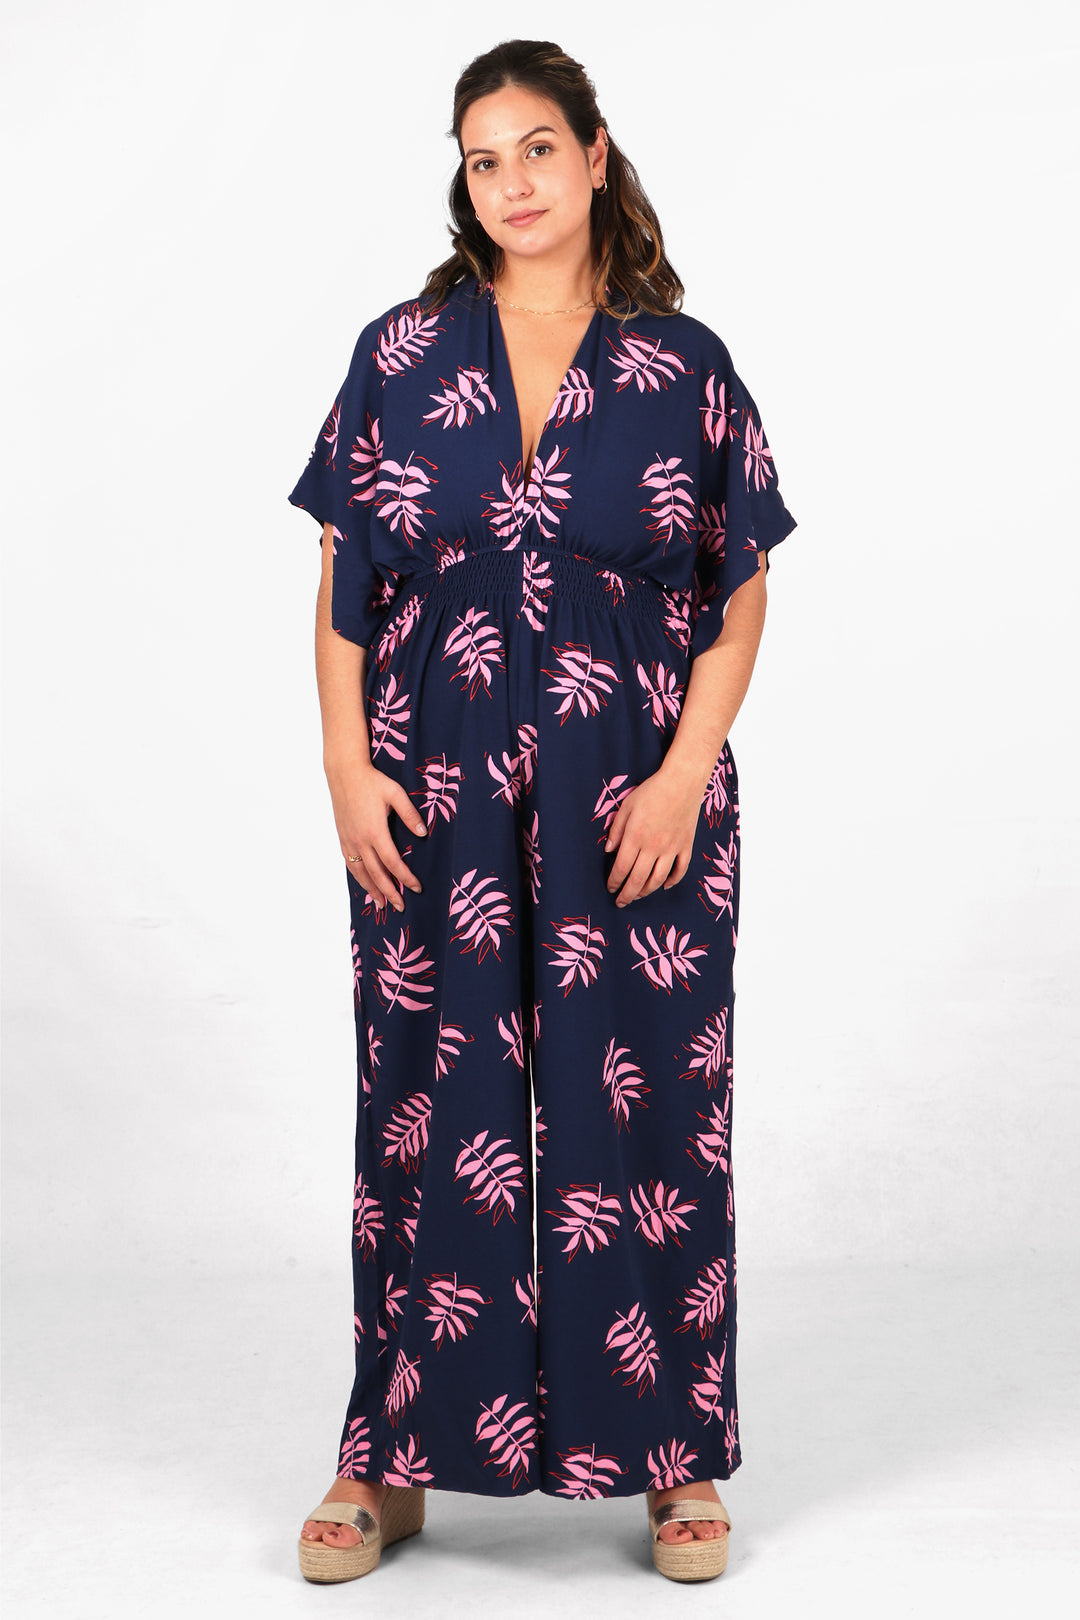 navy blue and pink leaf print wide leg jumpsuit with elbow length short angel sleeves and a deep v neck